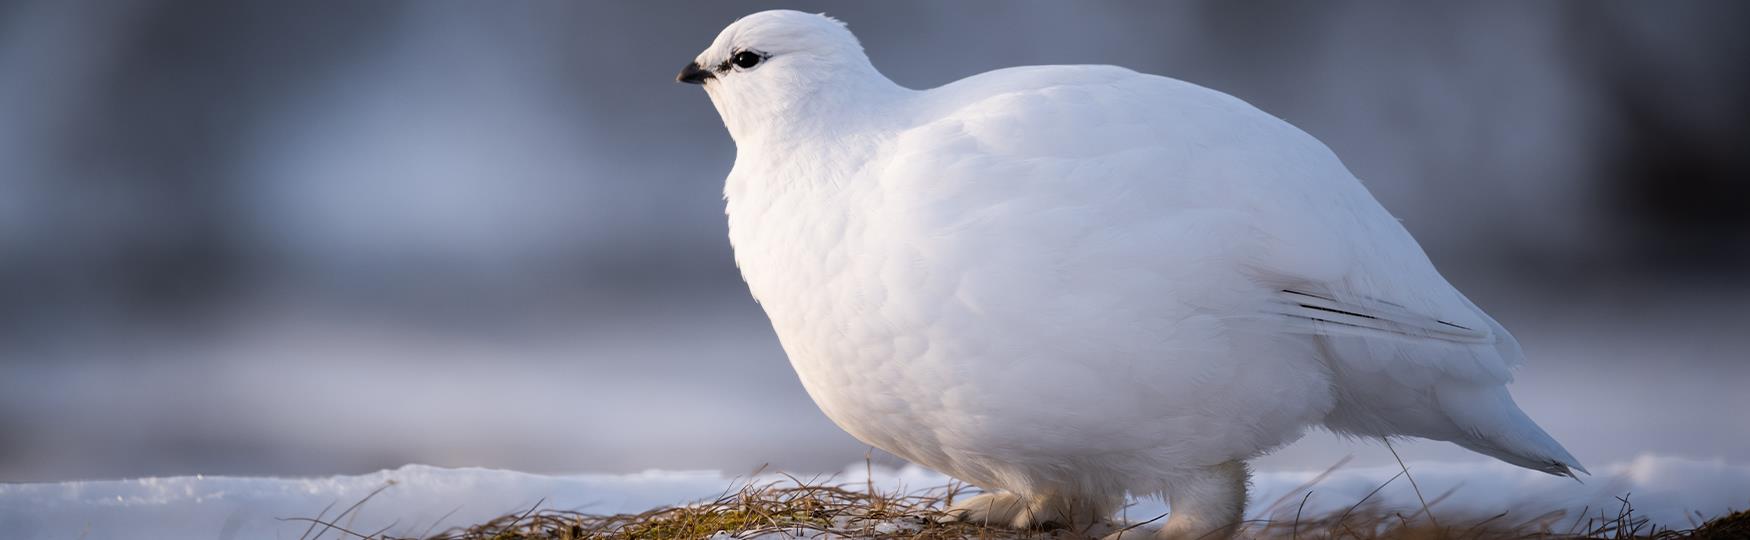 A Svalbard rock ptarmigan in its white plumage sitting on tundra lightly covered in snow